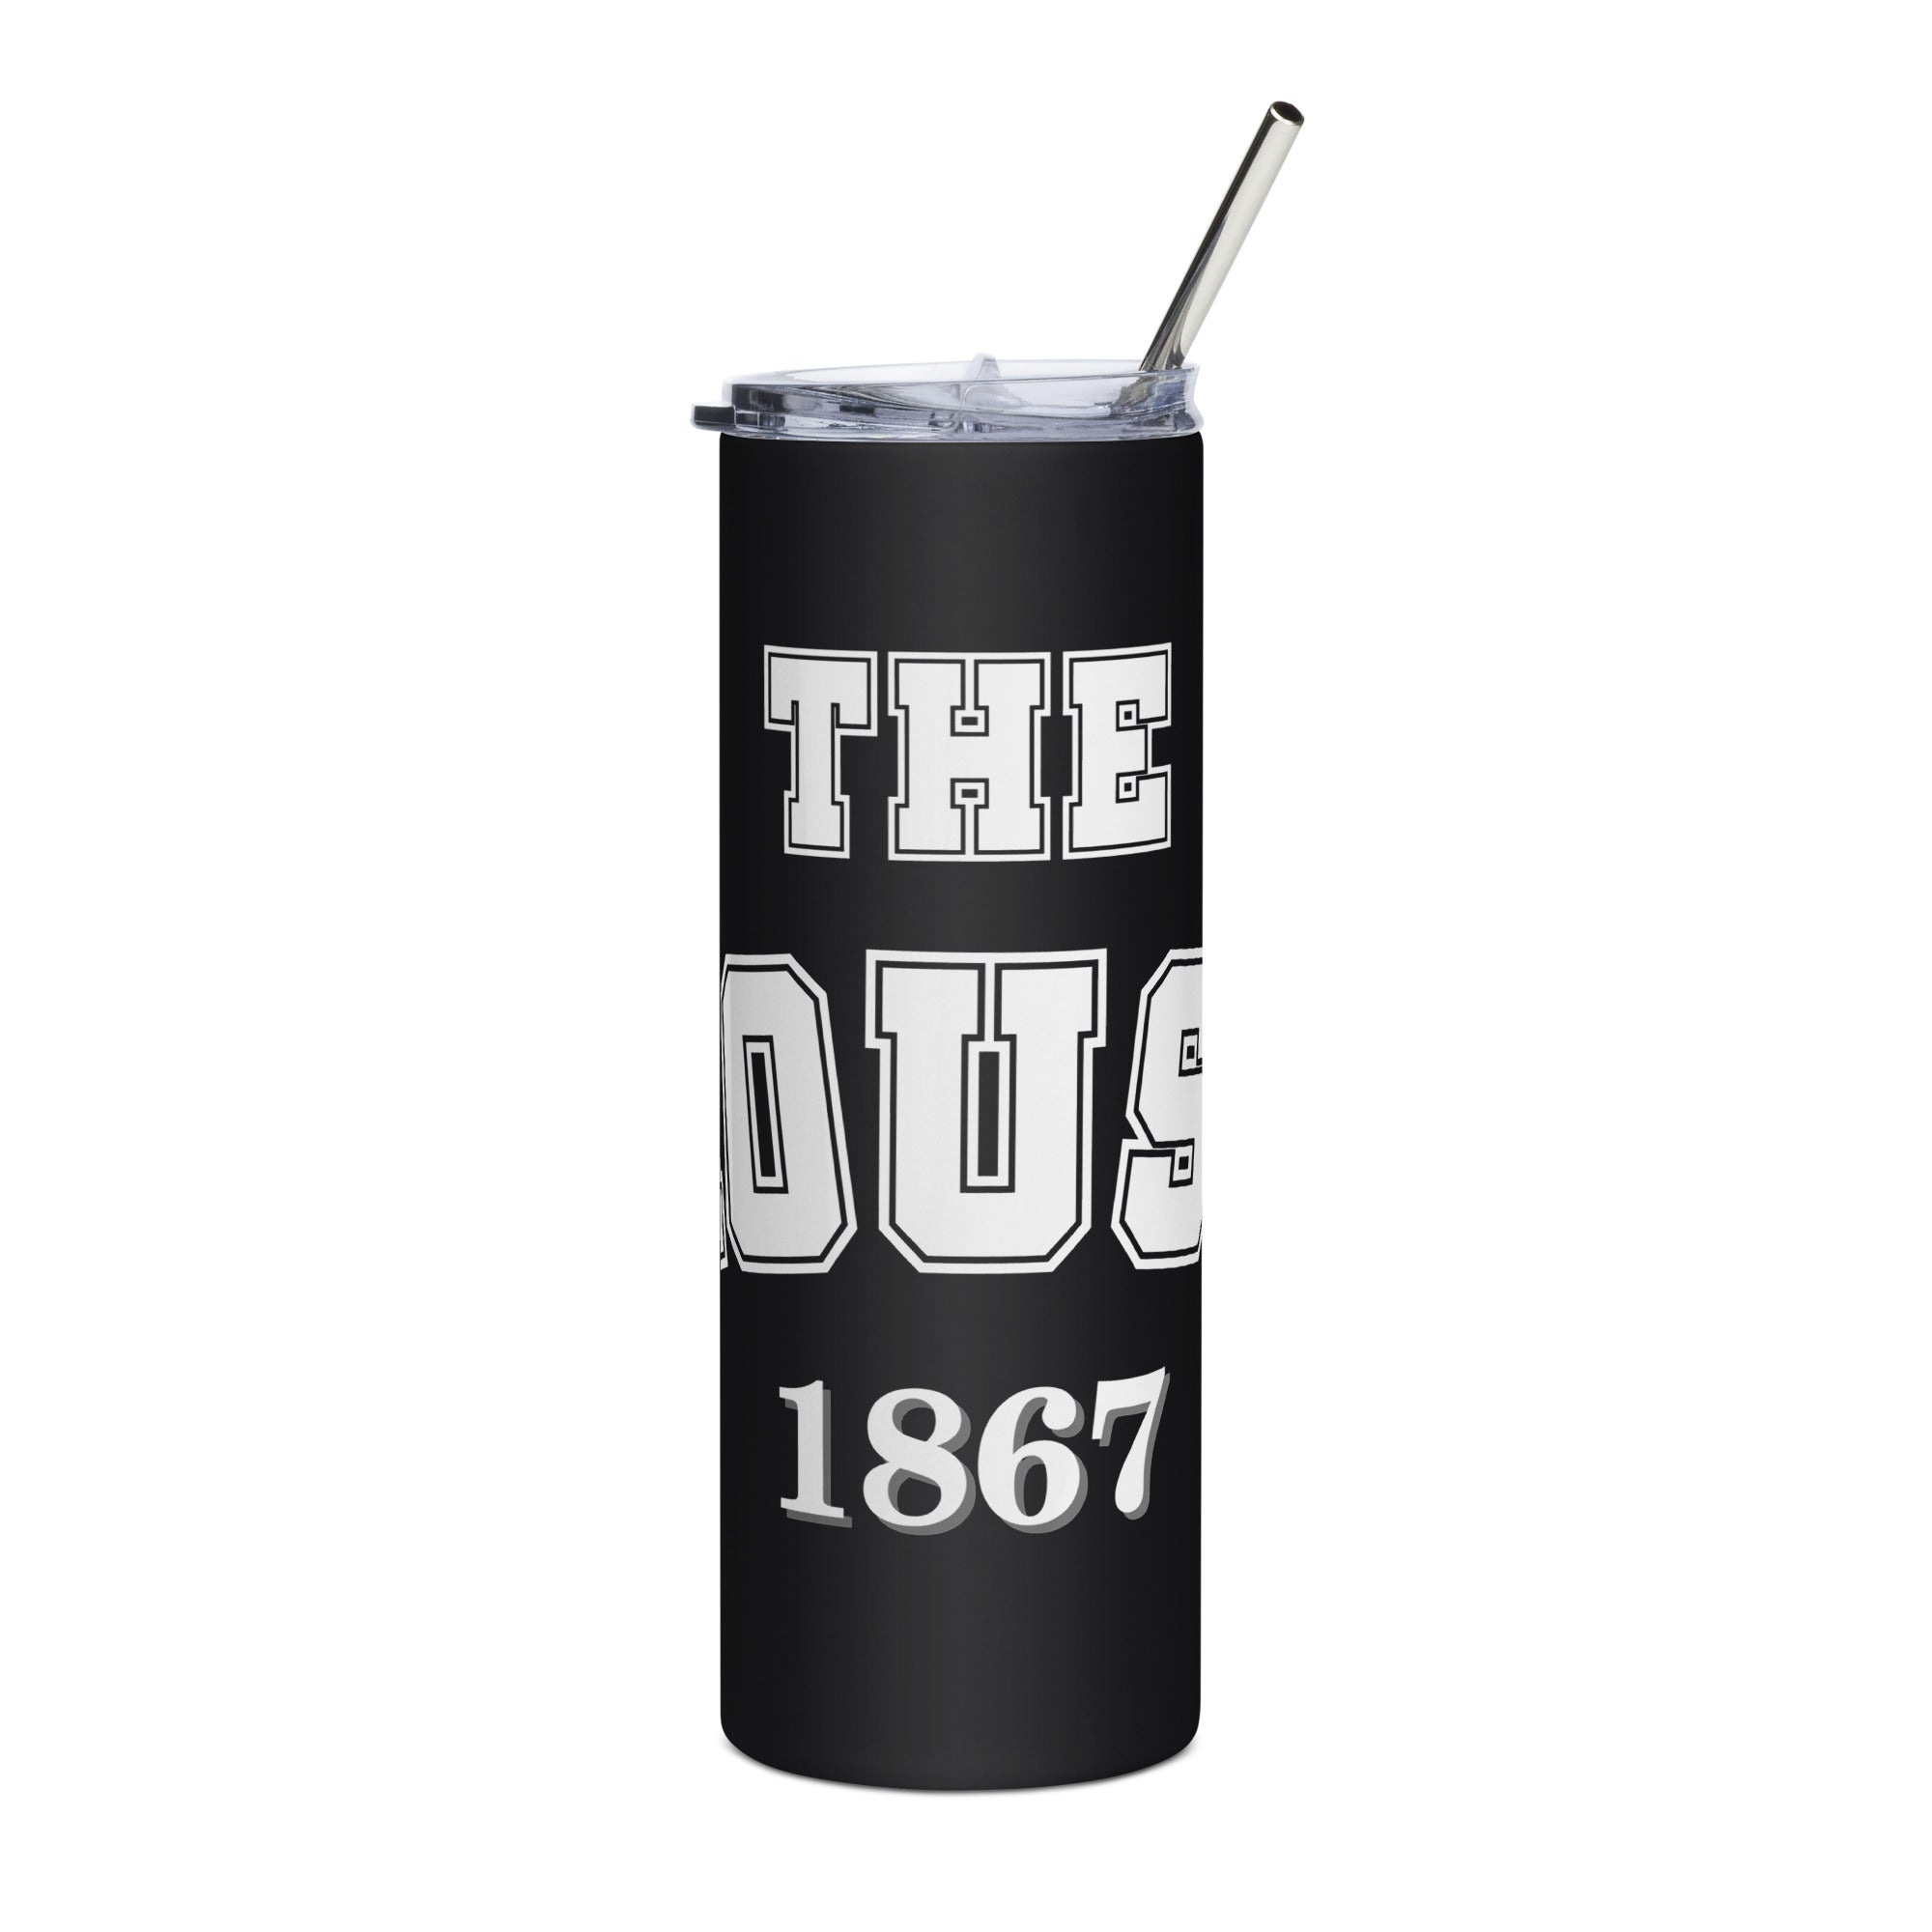 The House 2- Stainless steel tumbler